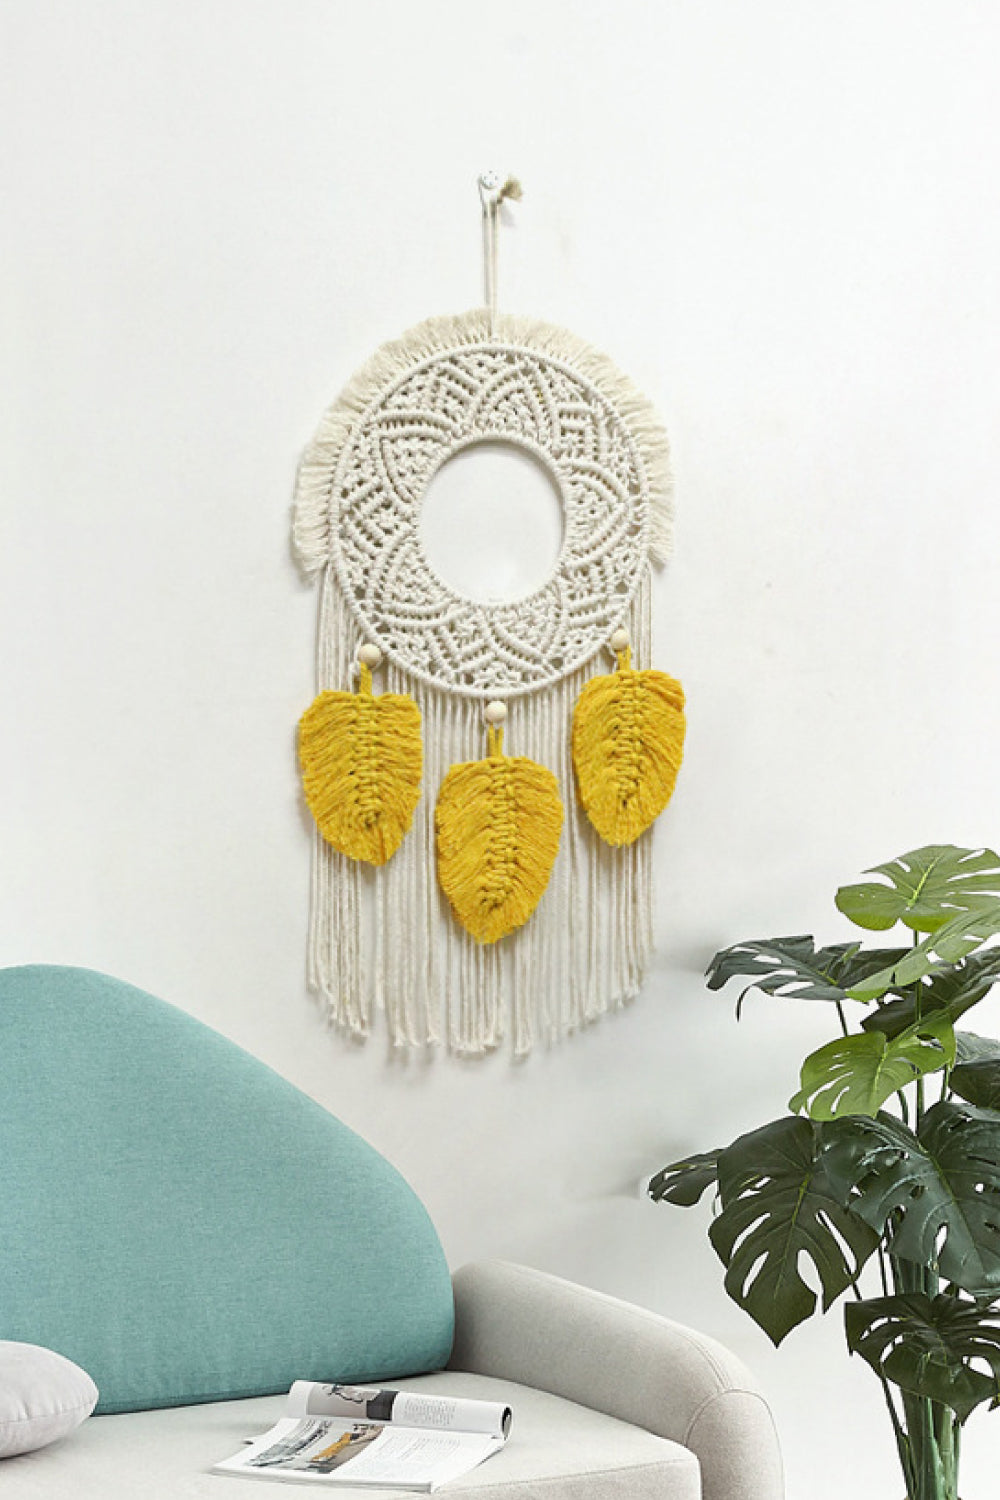 Beige All About The Vibe Hand-Woven Fringe Macrame Wall Hanging Home